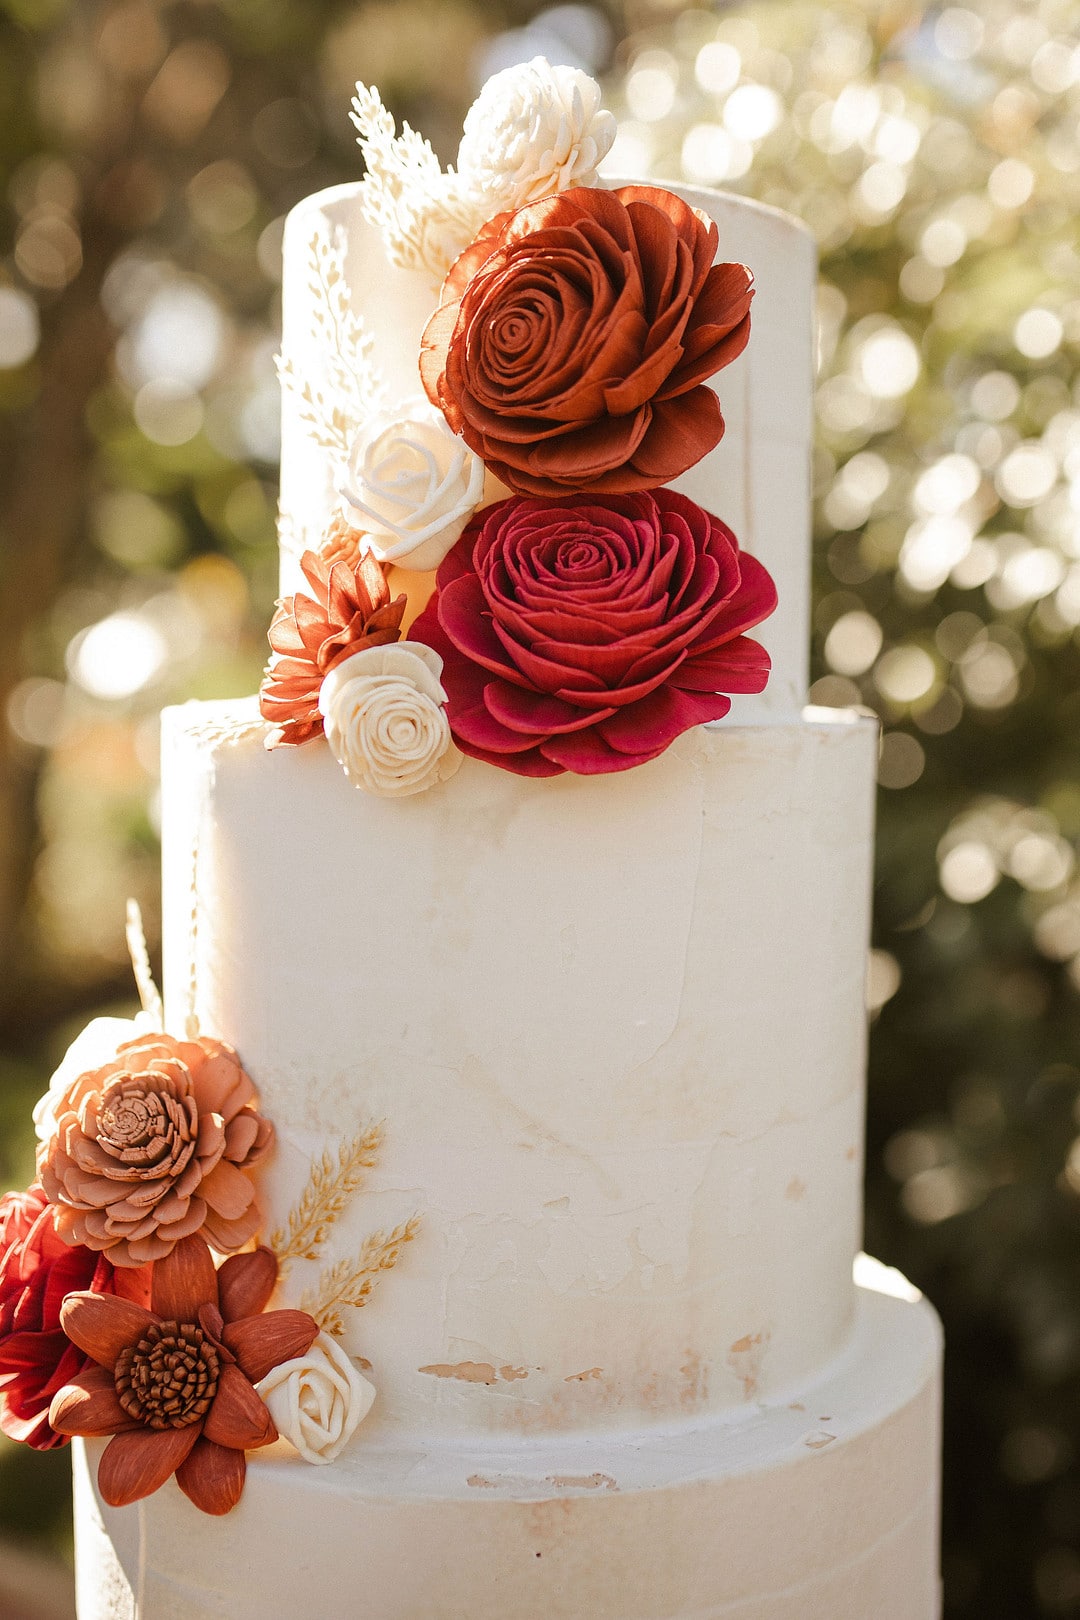 the 3 tier white cake with red, orange and white wooden flowers for the central florida boho wedding inspiration